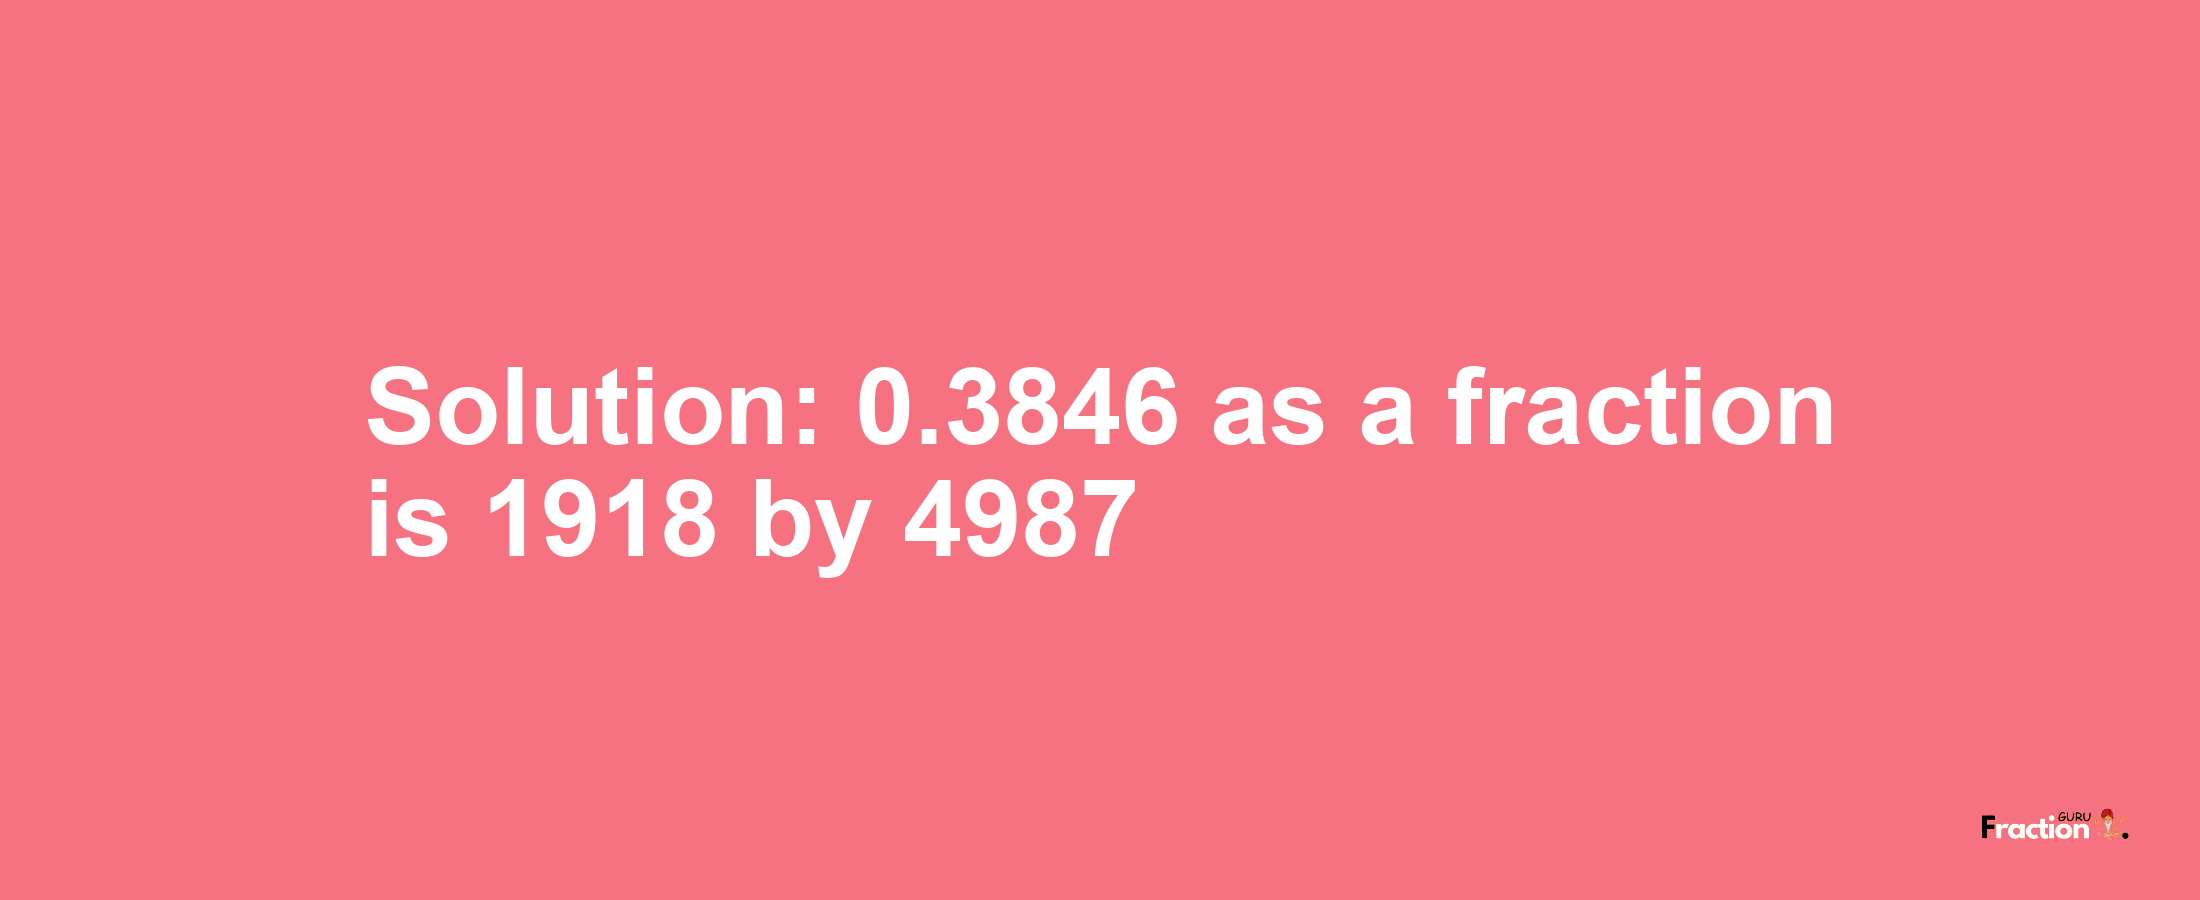 Solution:0.3846 as a fraction is 1918/4987